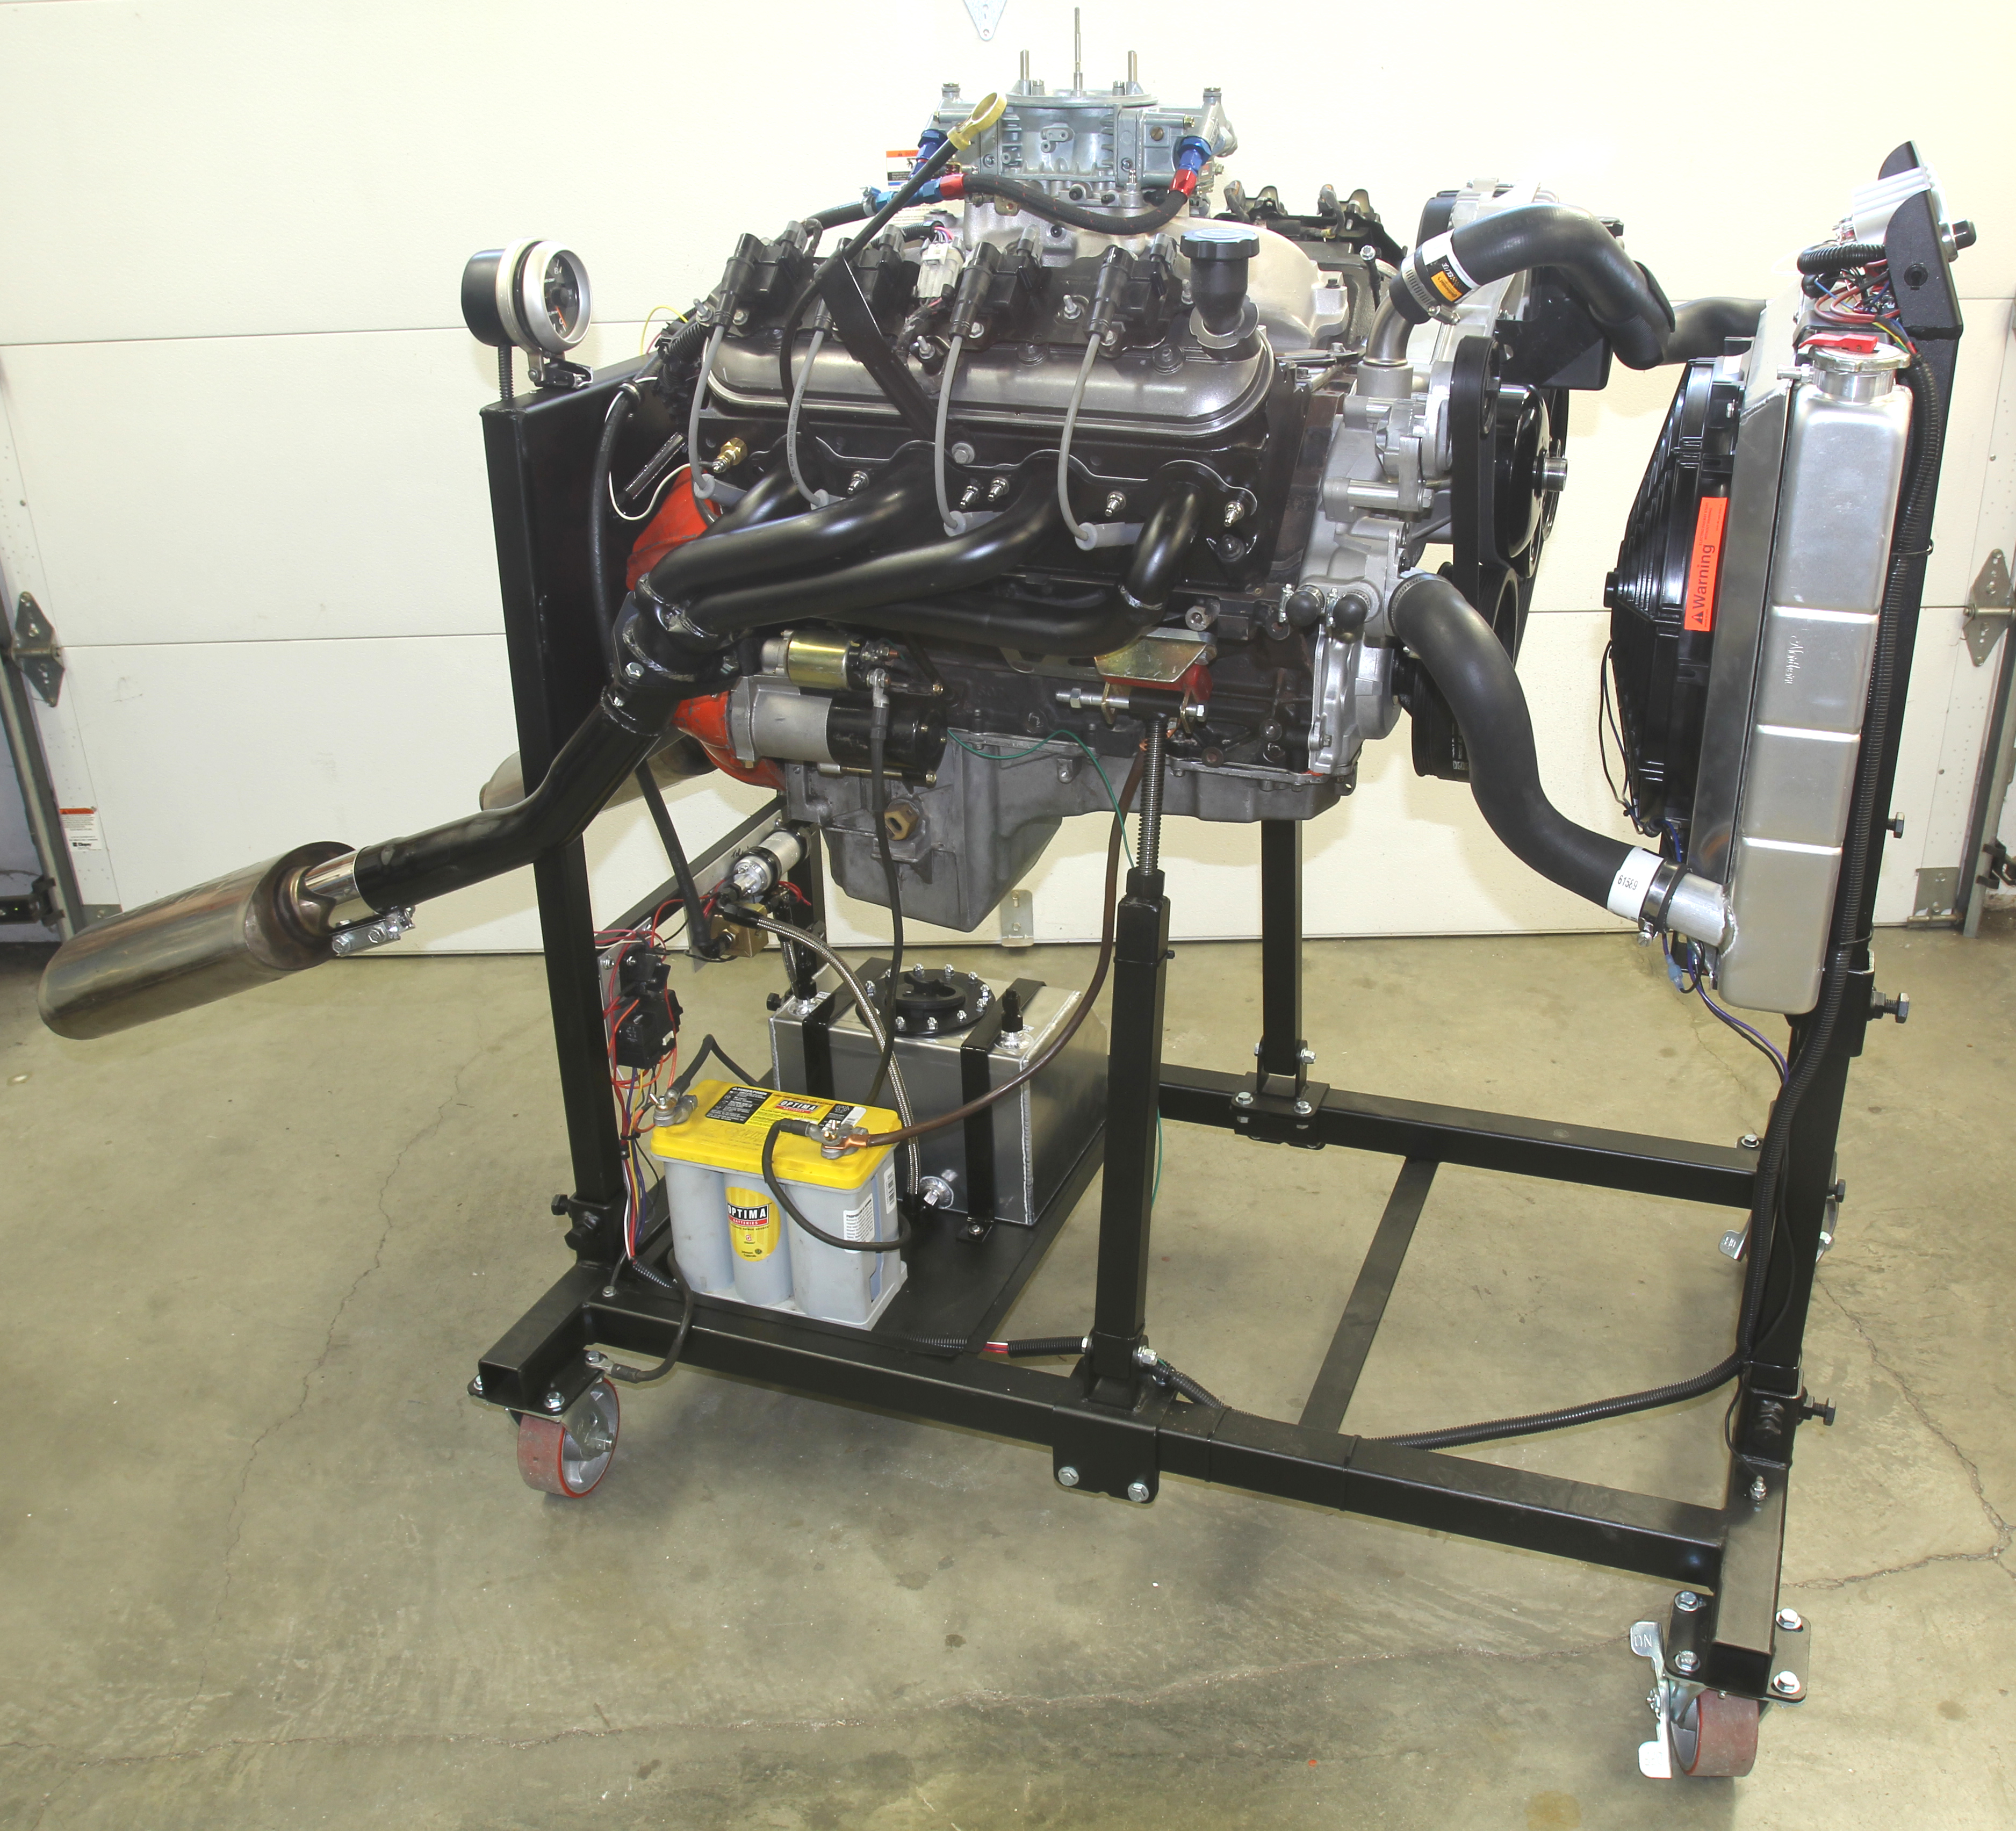 How do you build an engine test stand?